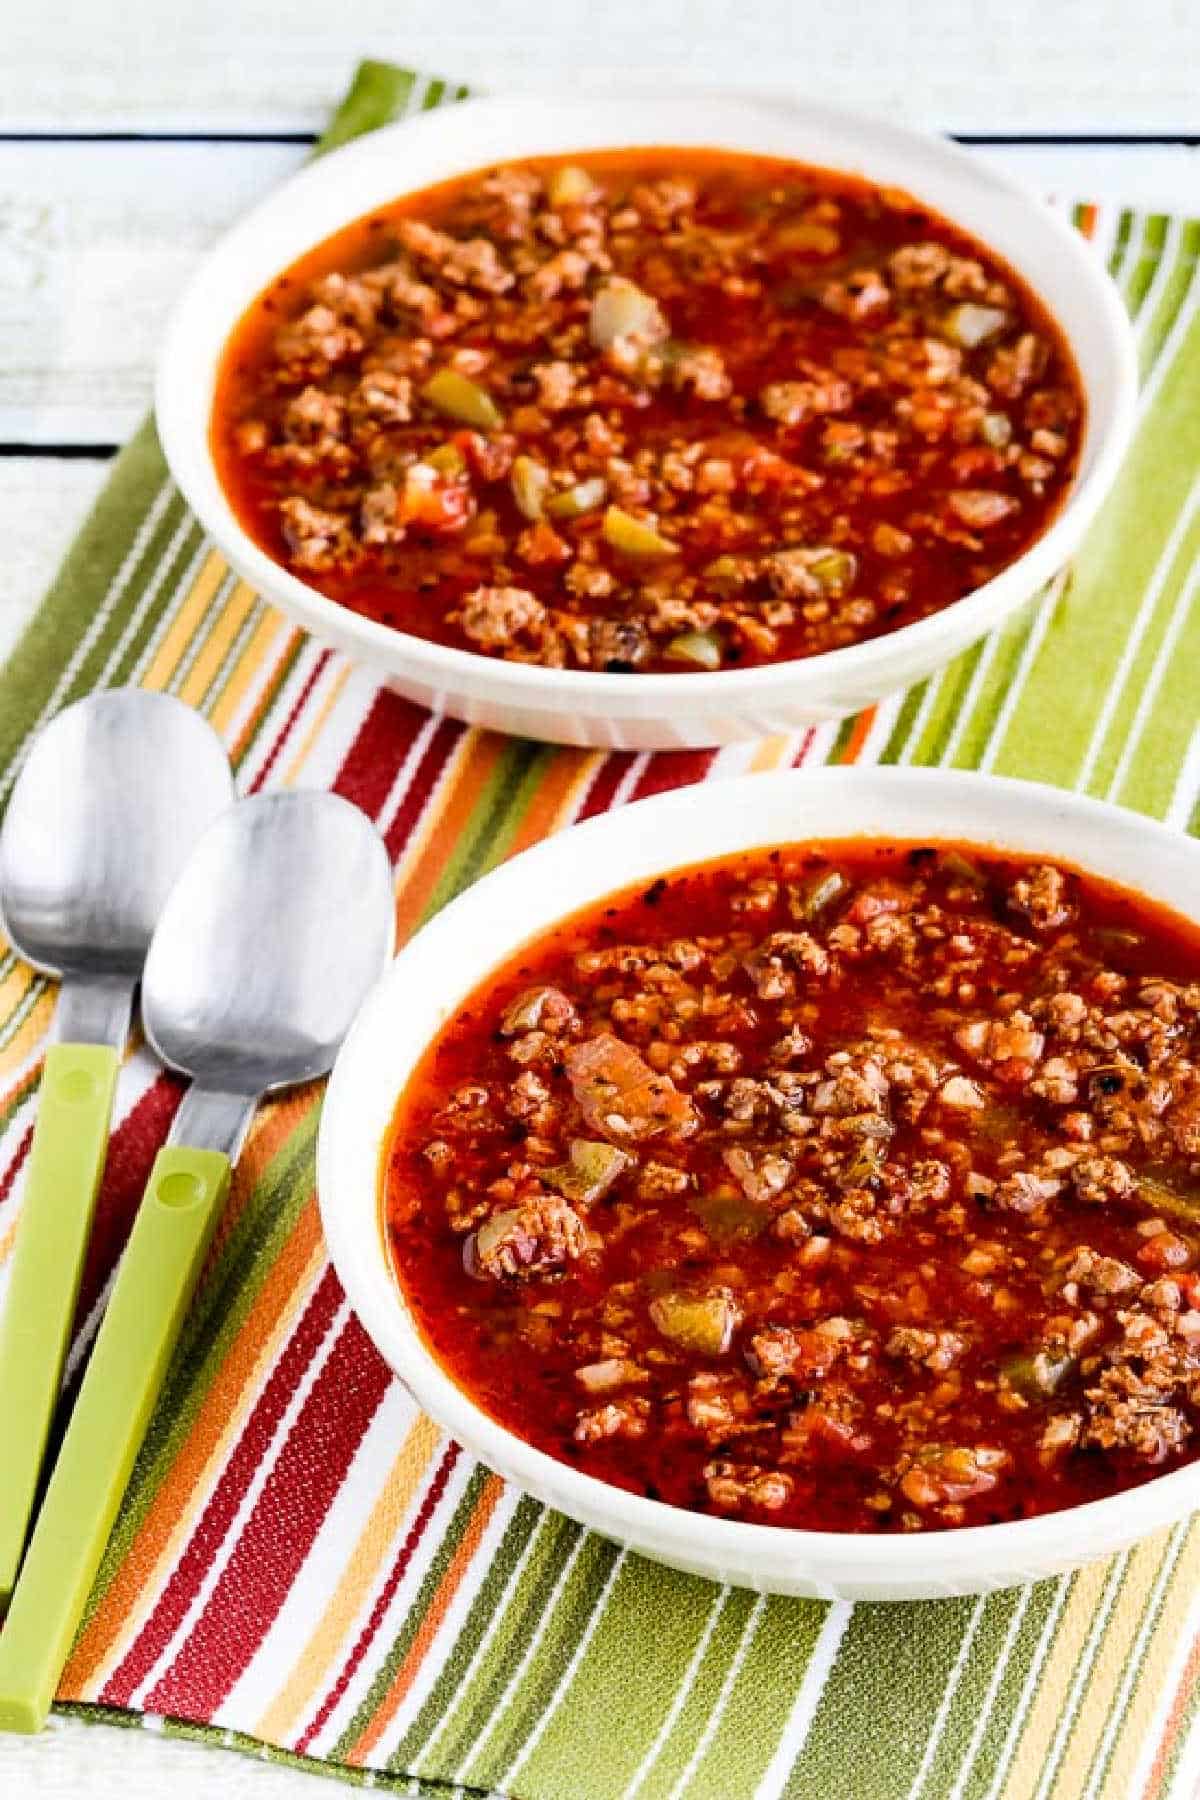 Low-Carb Stuffed Pepper Soup shown in two serving bowls